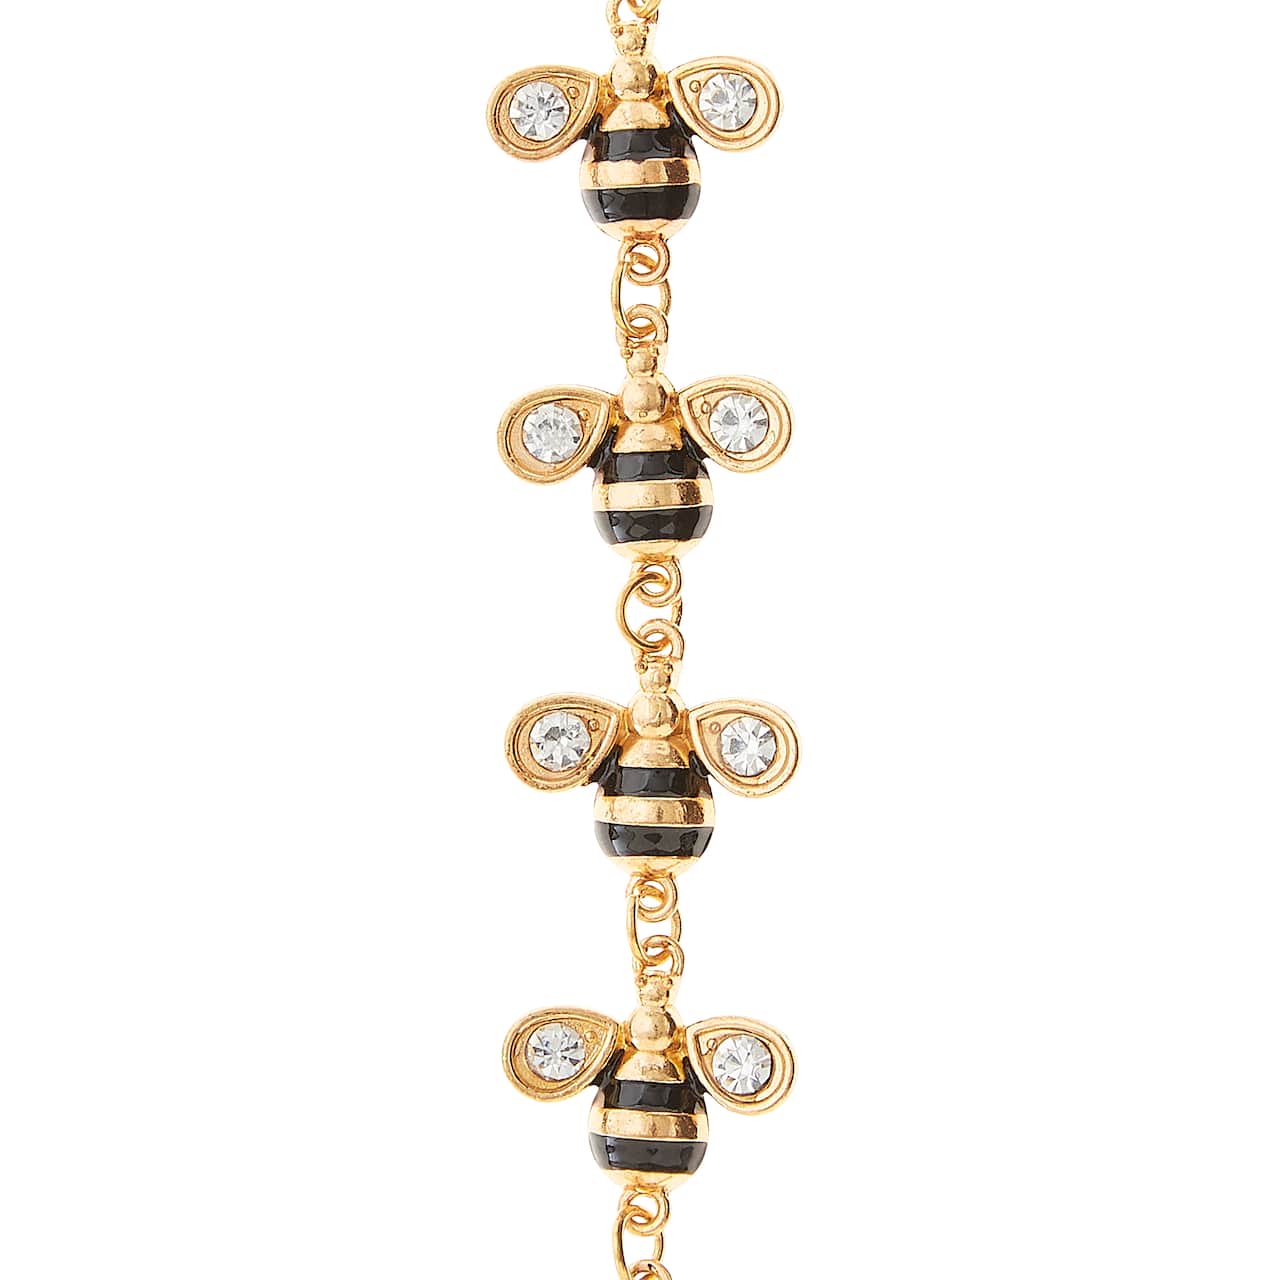 Gold Metal Bumble Bee Charms, 19mm by Bead Landing™